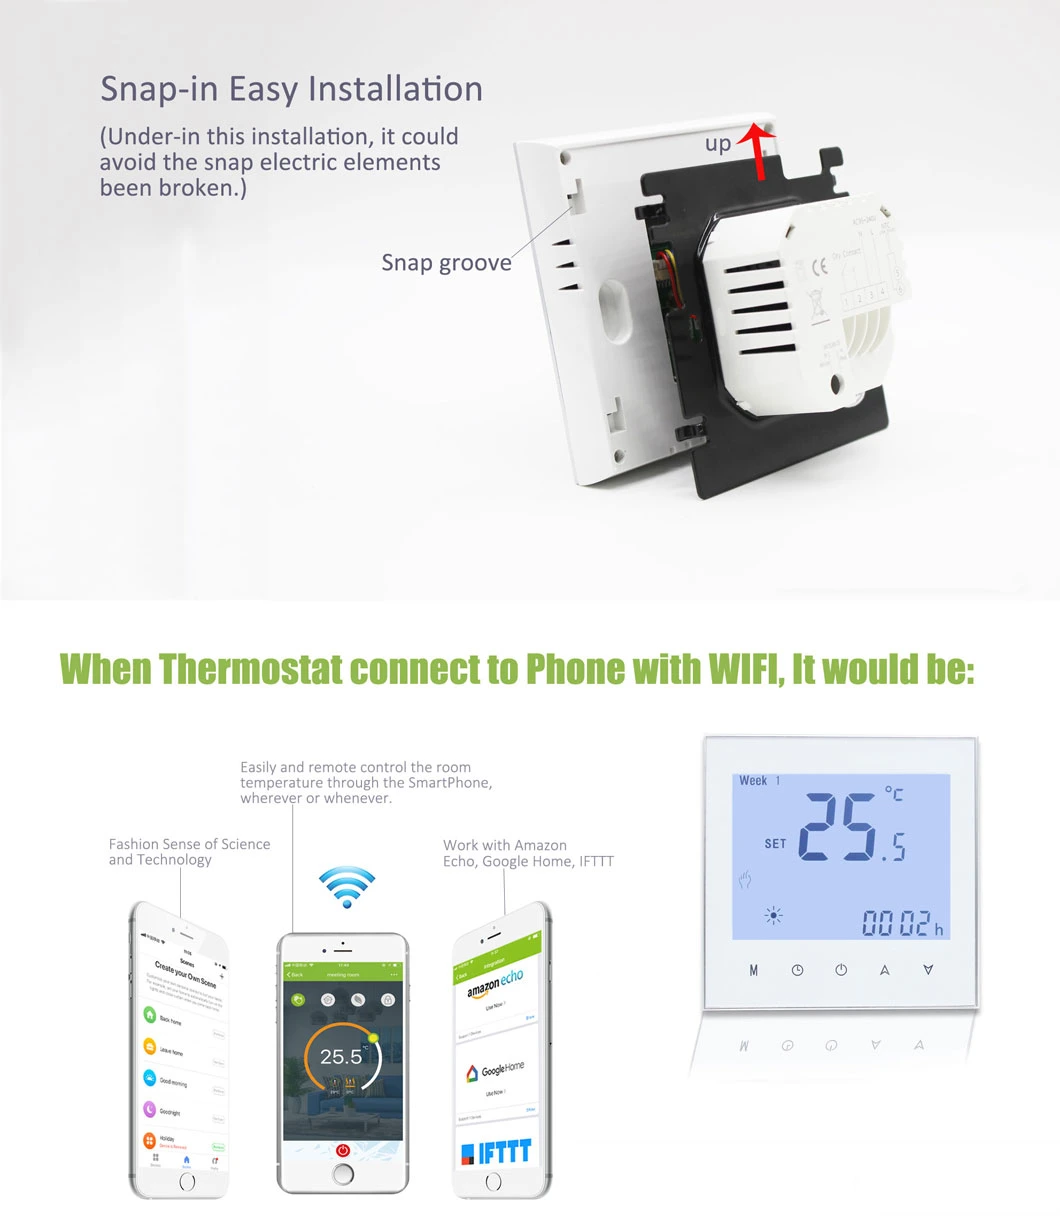 Electrical Heating WiFi Smart Thermostat with Capacitive Touch Buttons